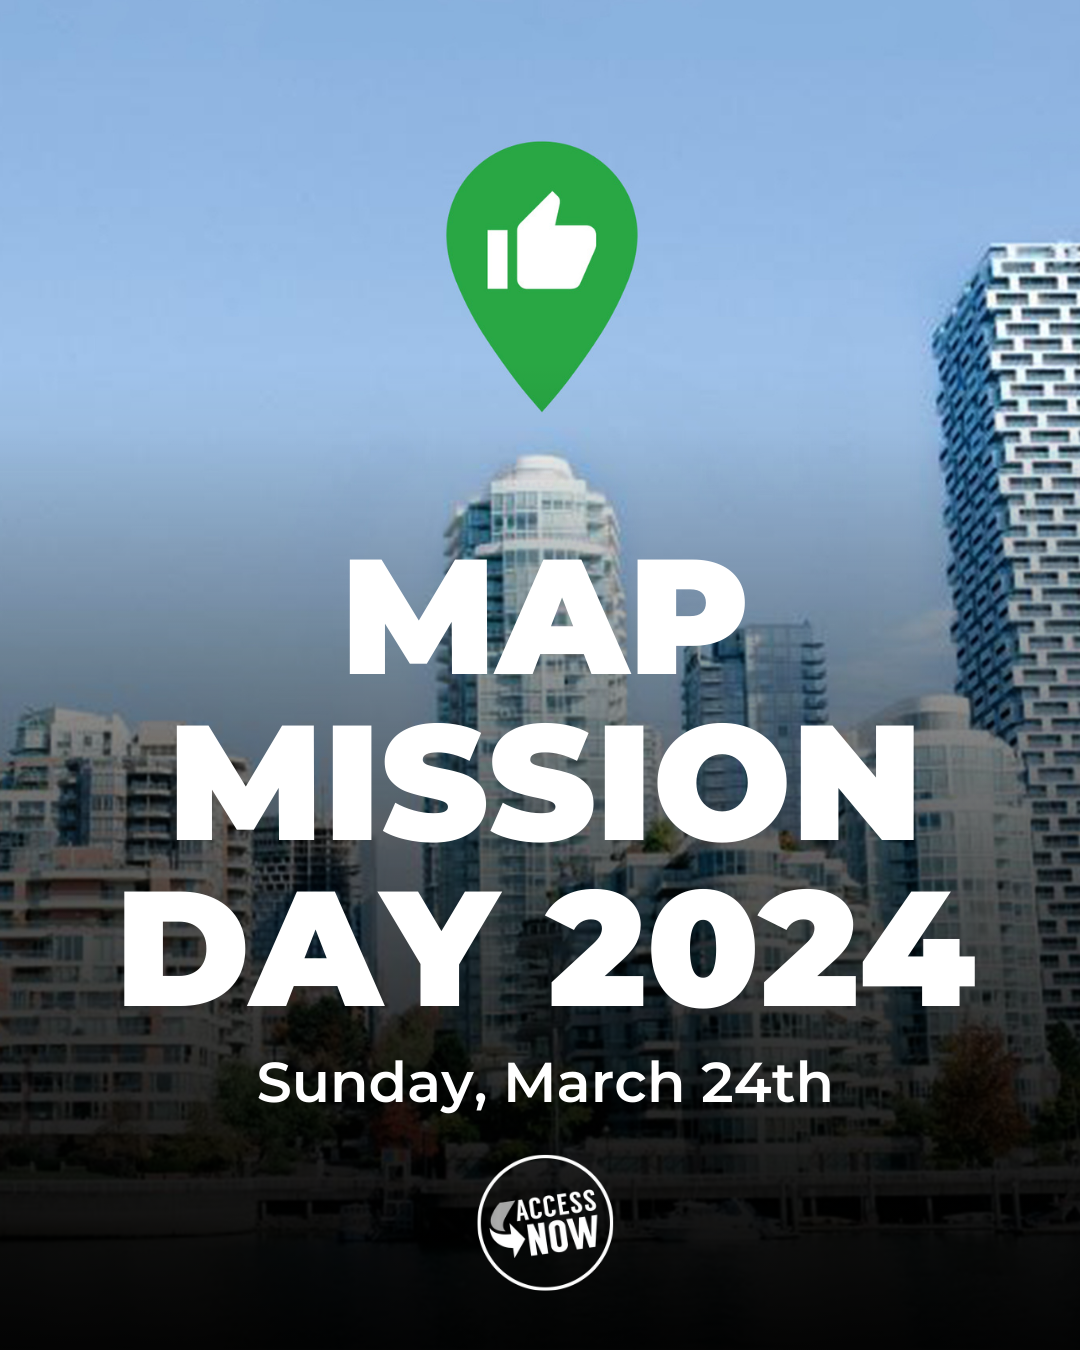 Social graphic to register for MapMission Day 2024, with photo of a city with a green accessible pin on top.